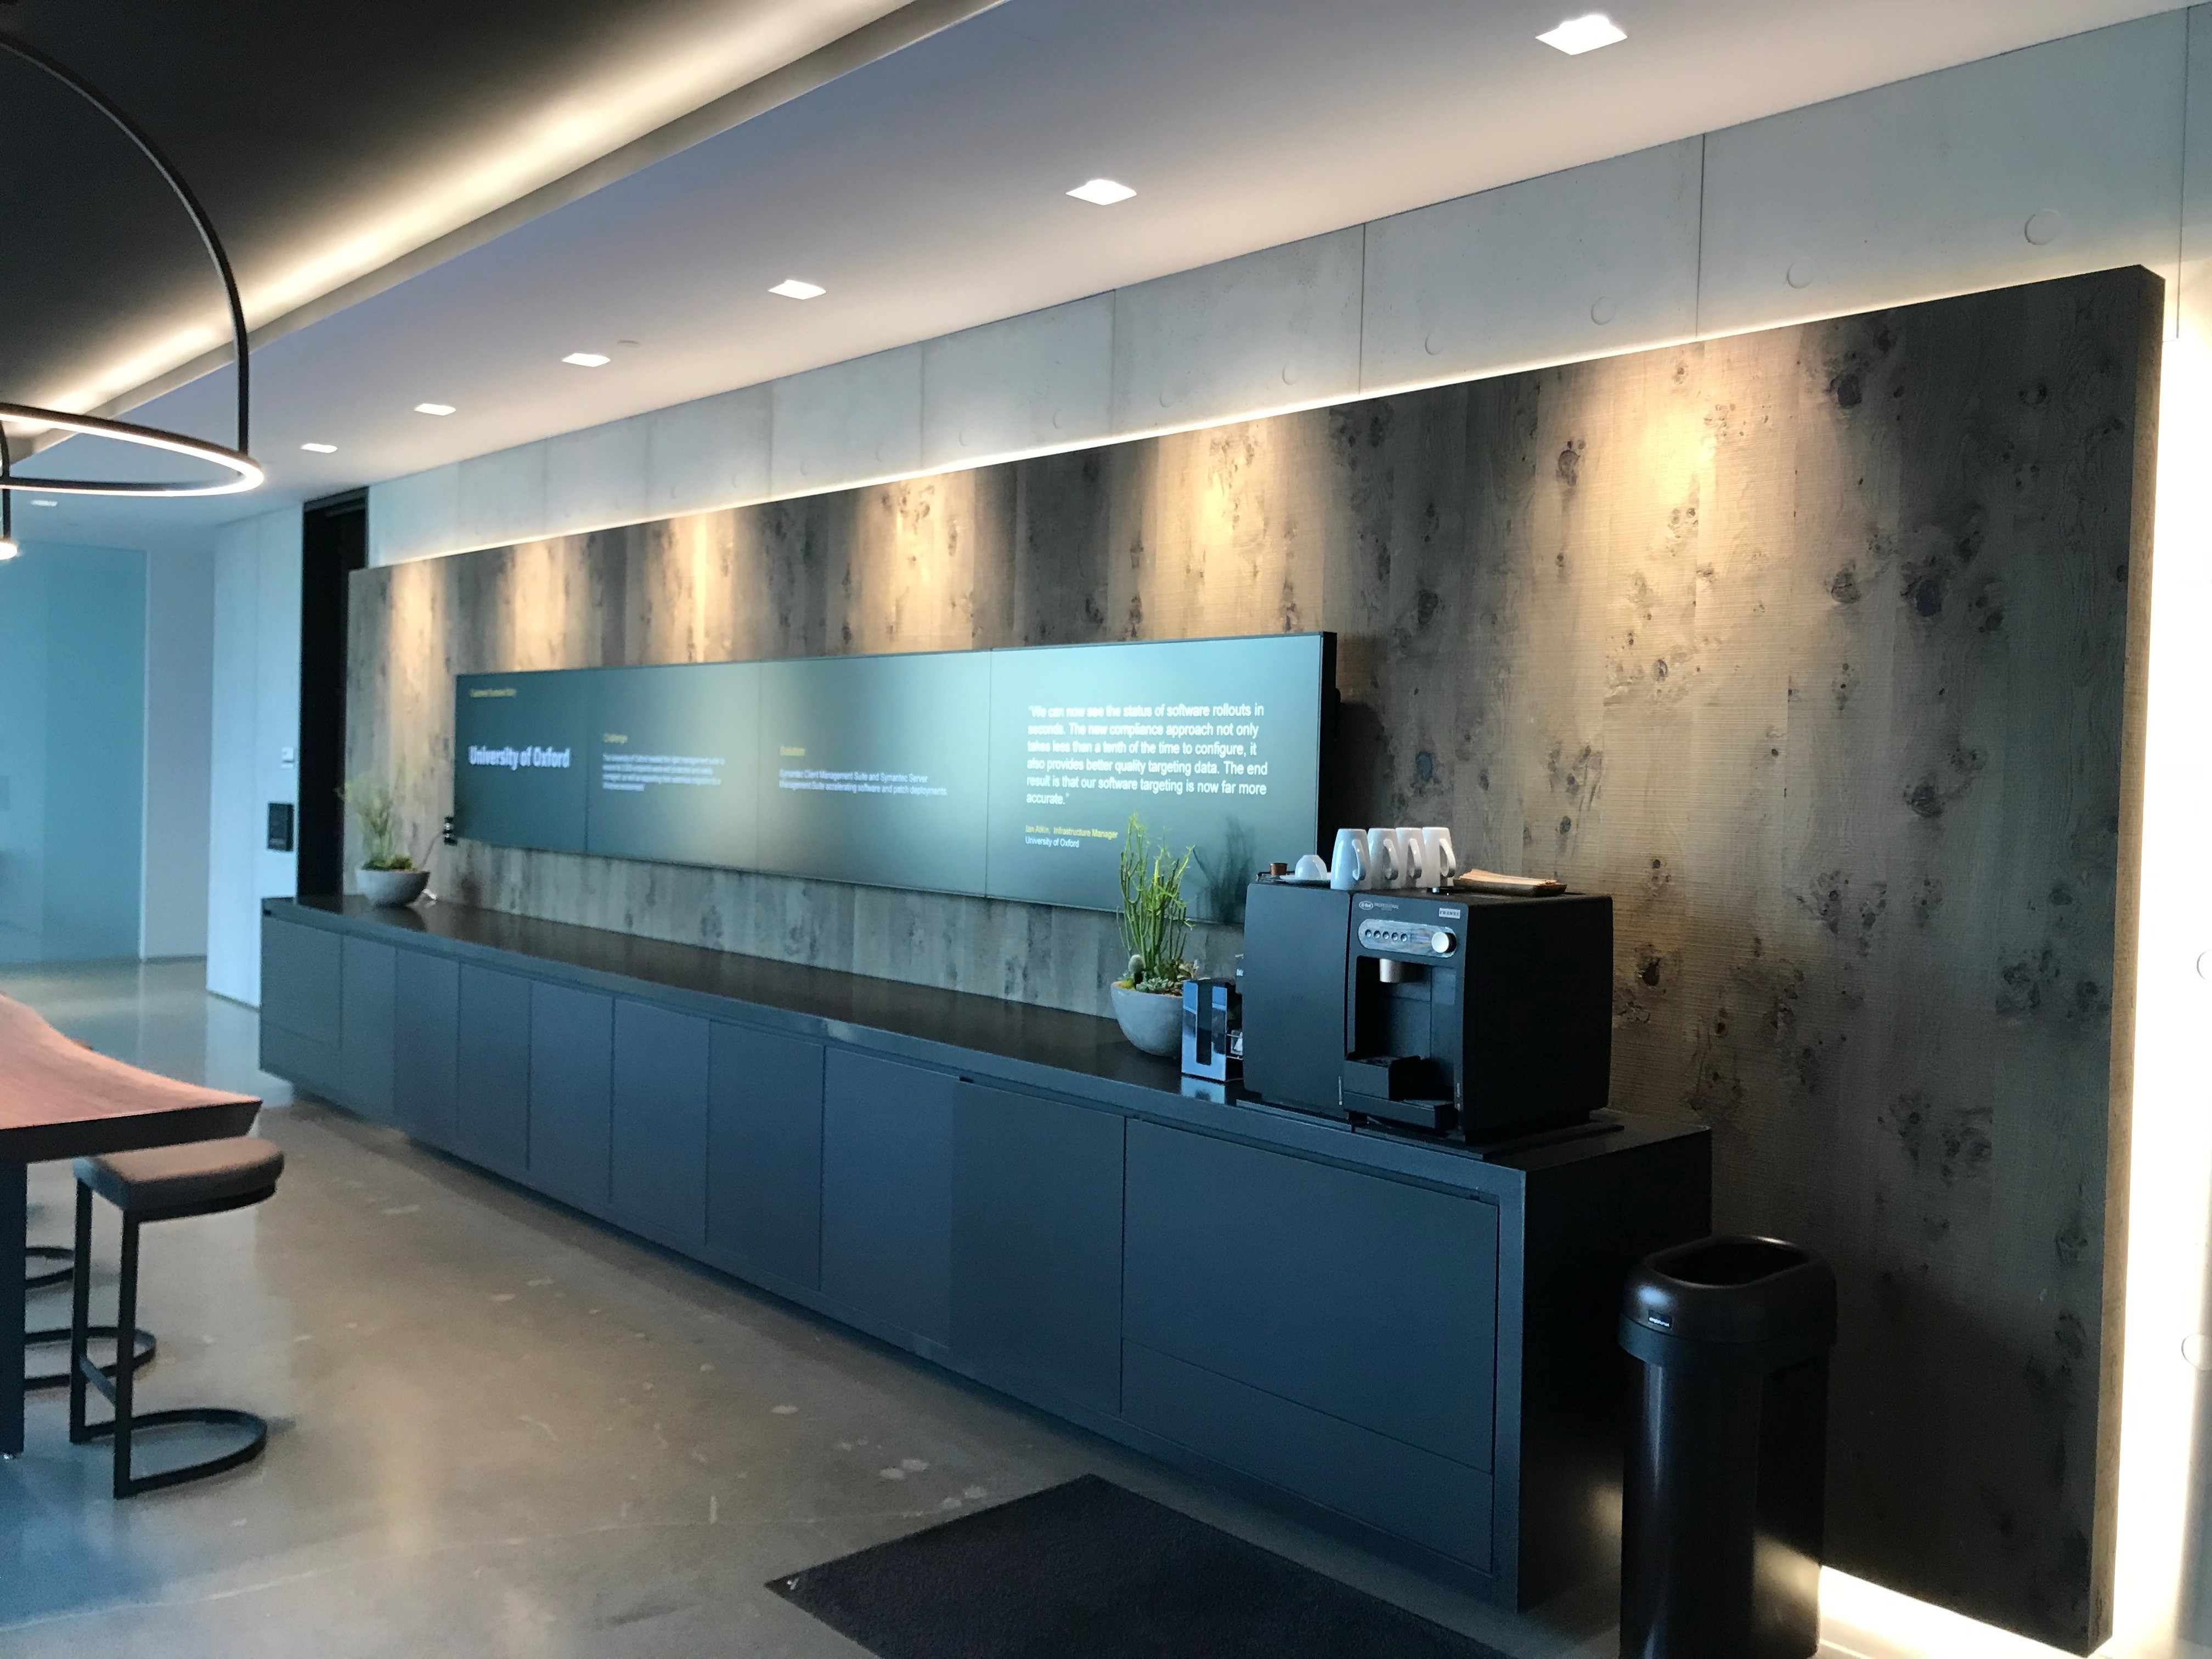 Videowalls throughout the facility display constantly changing content, enhancing the experience for visitors and promoting energy and focus in the employees.